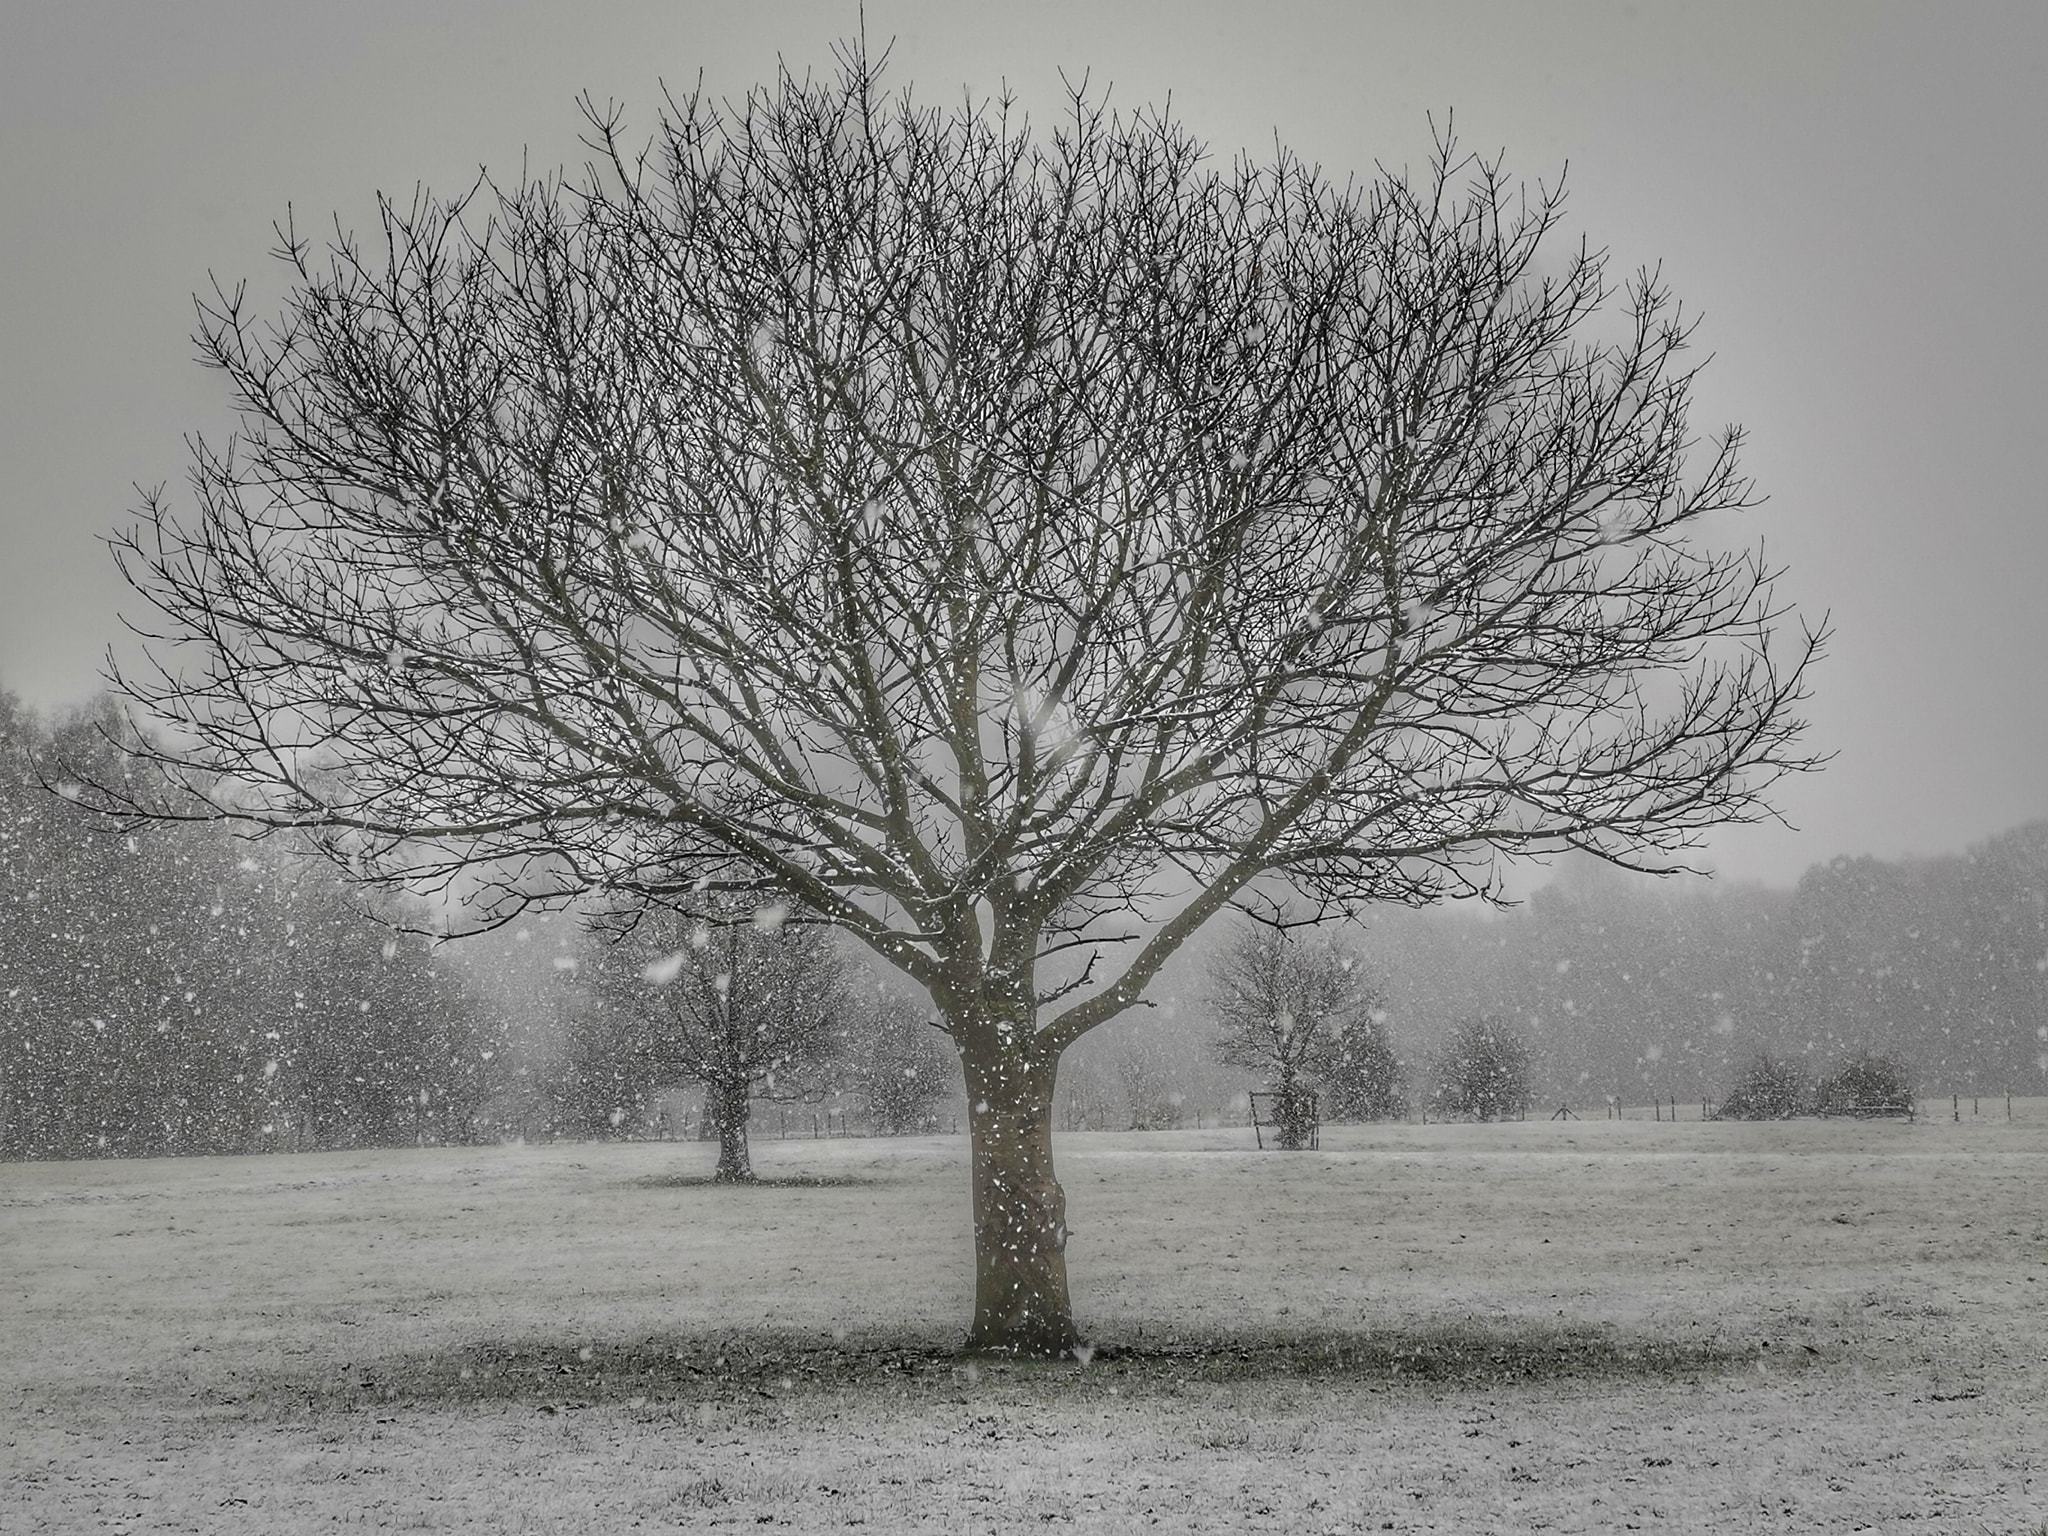 Its snowing in Marbury Park by Patricia Dyson